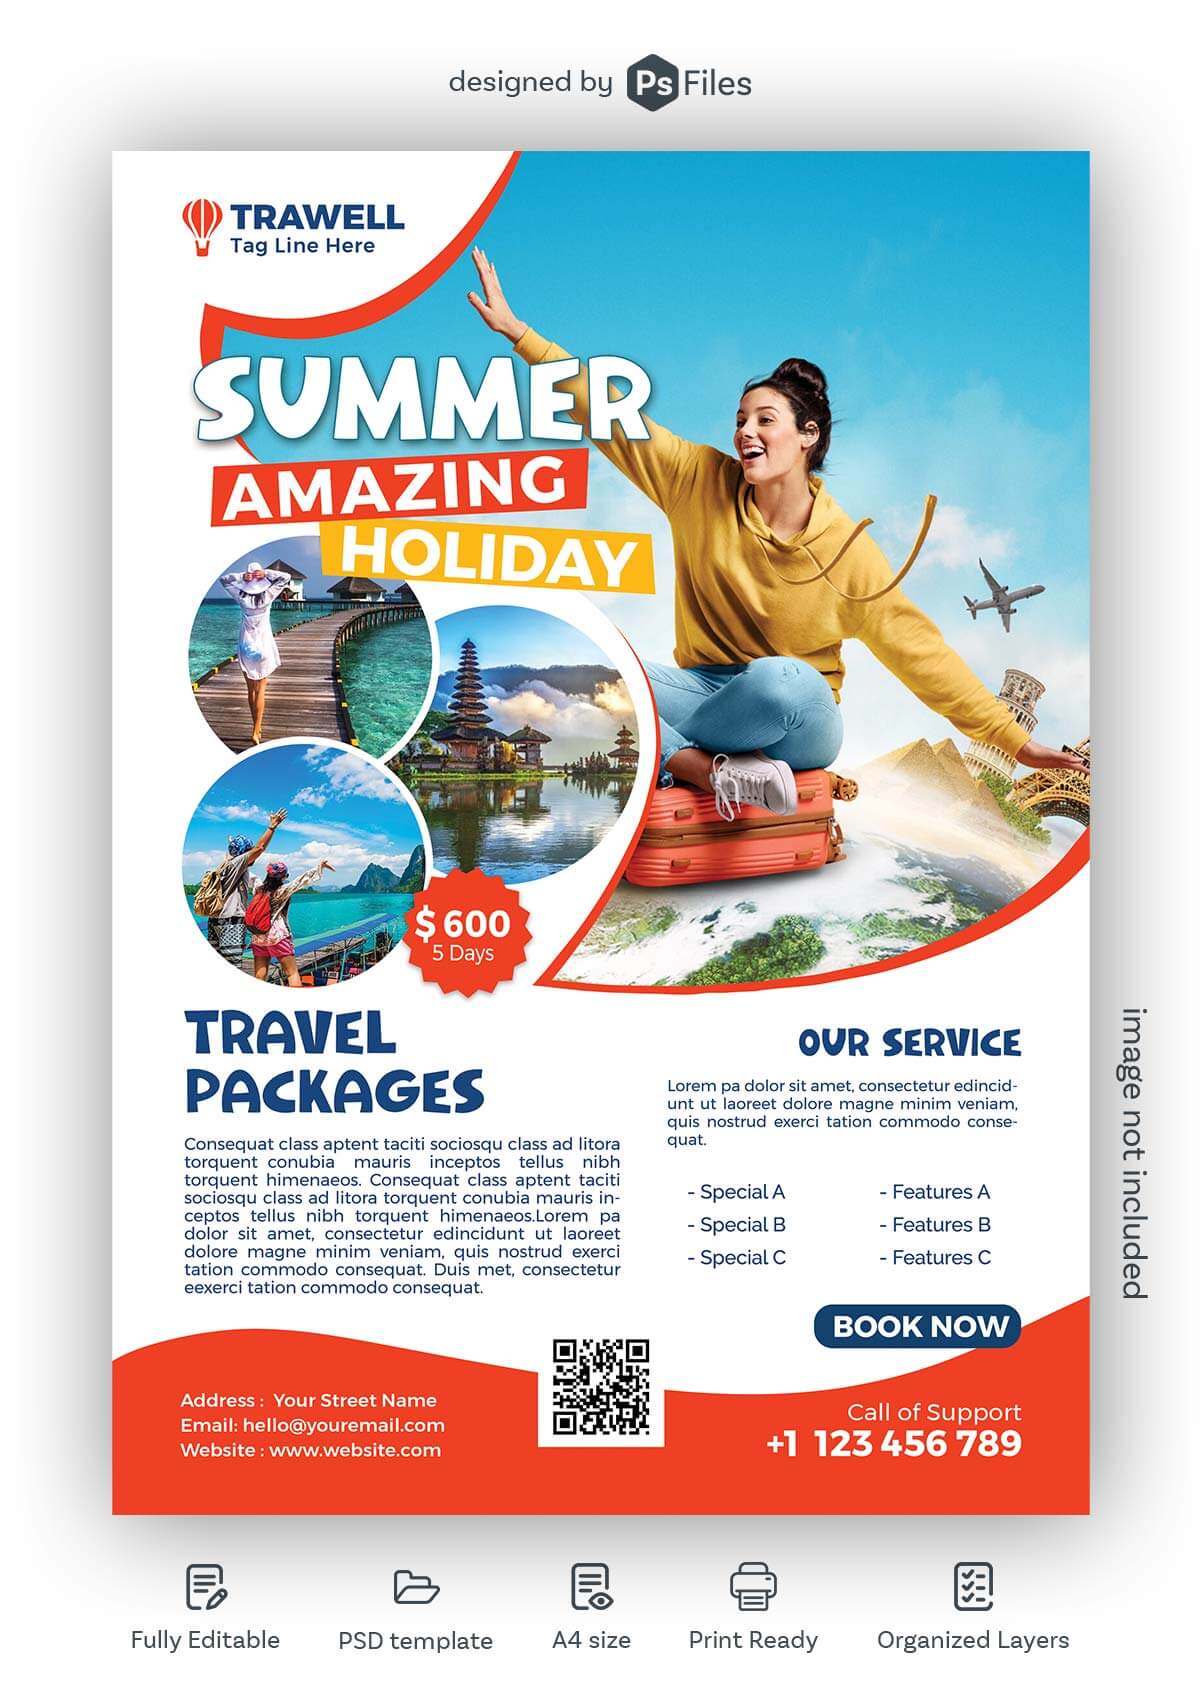 PsFiles Tour Travel Agency Advertisement AD Free PSD Flyer Template